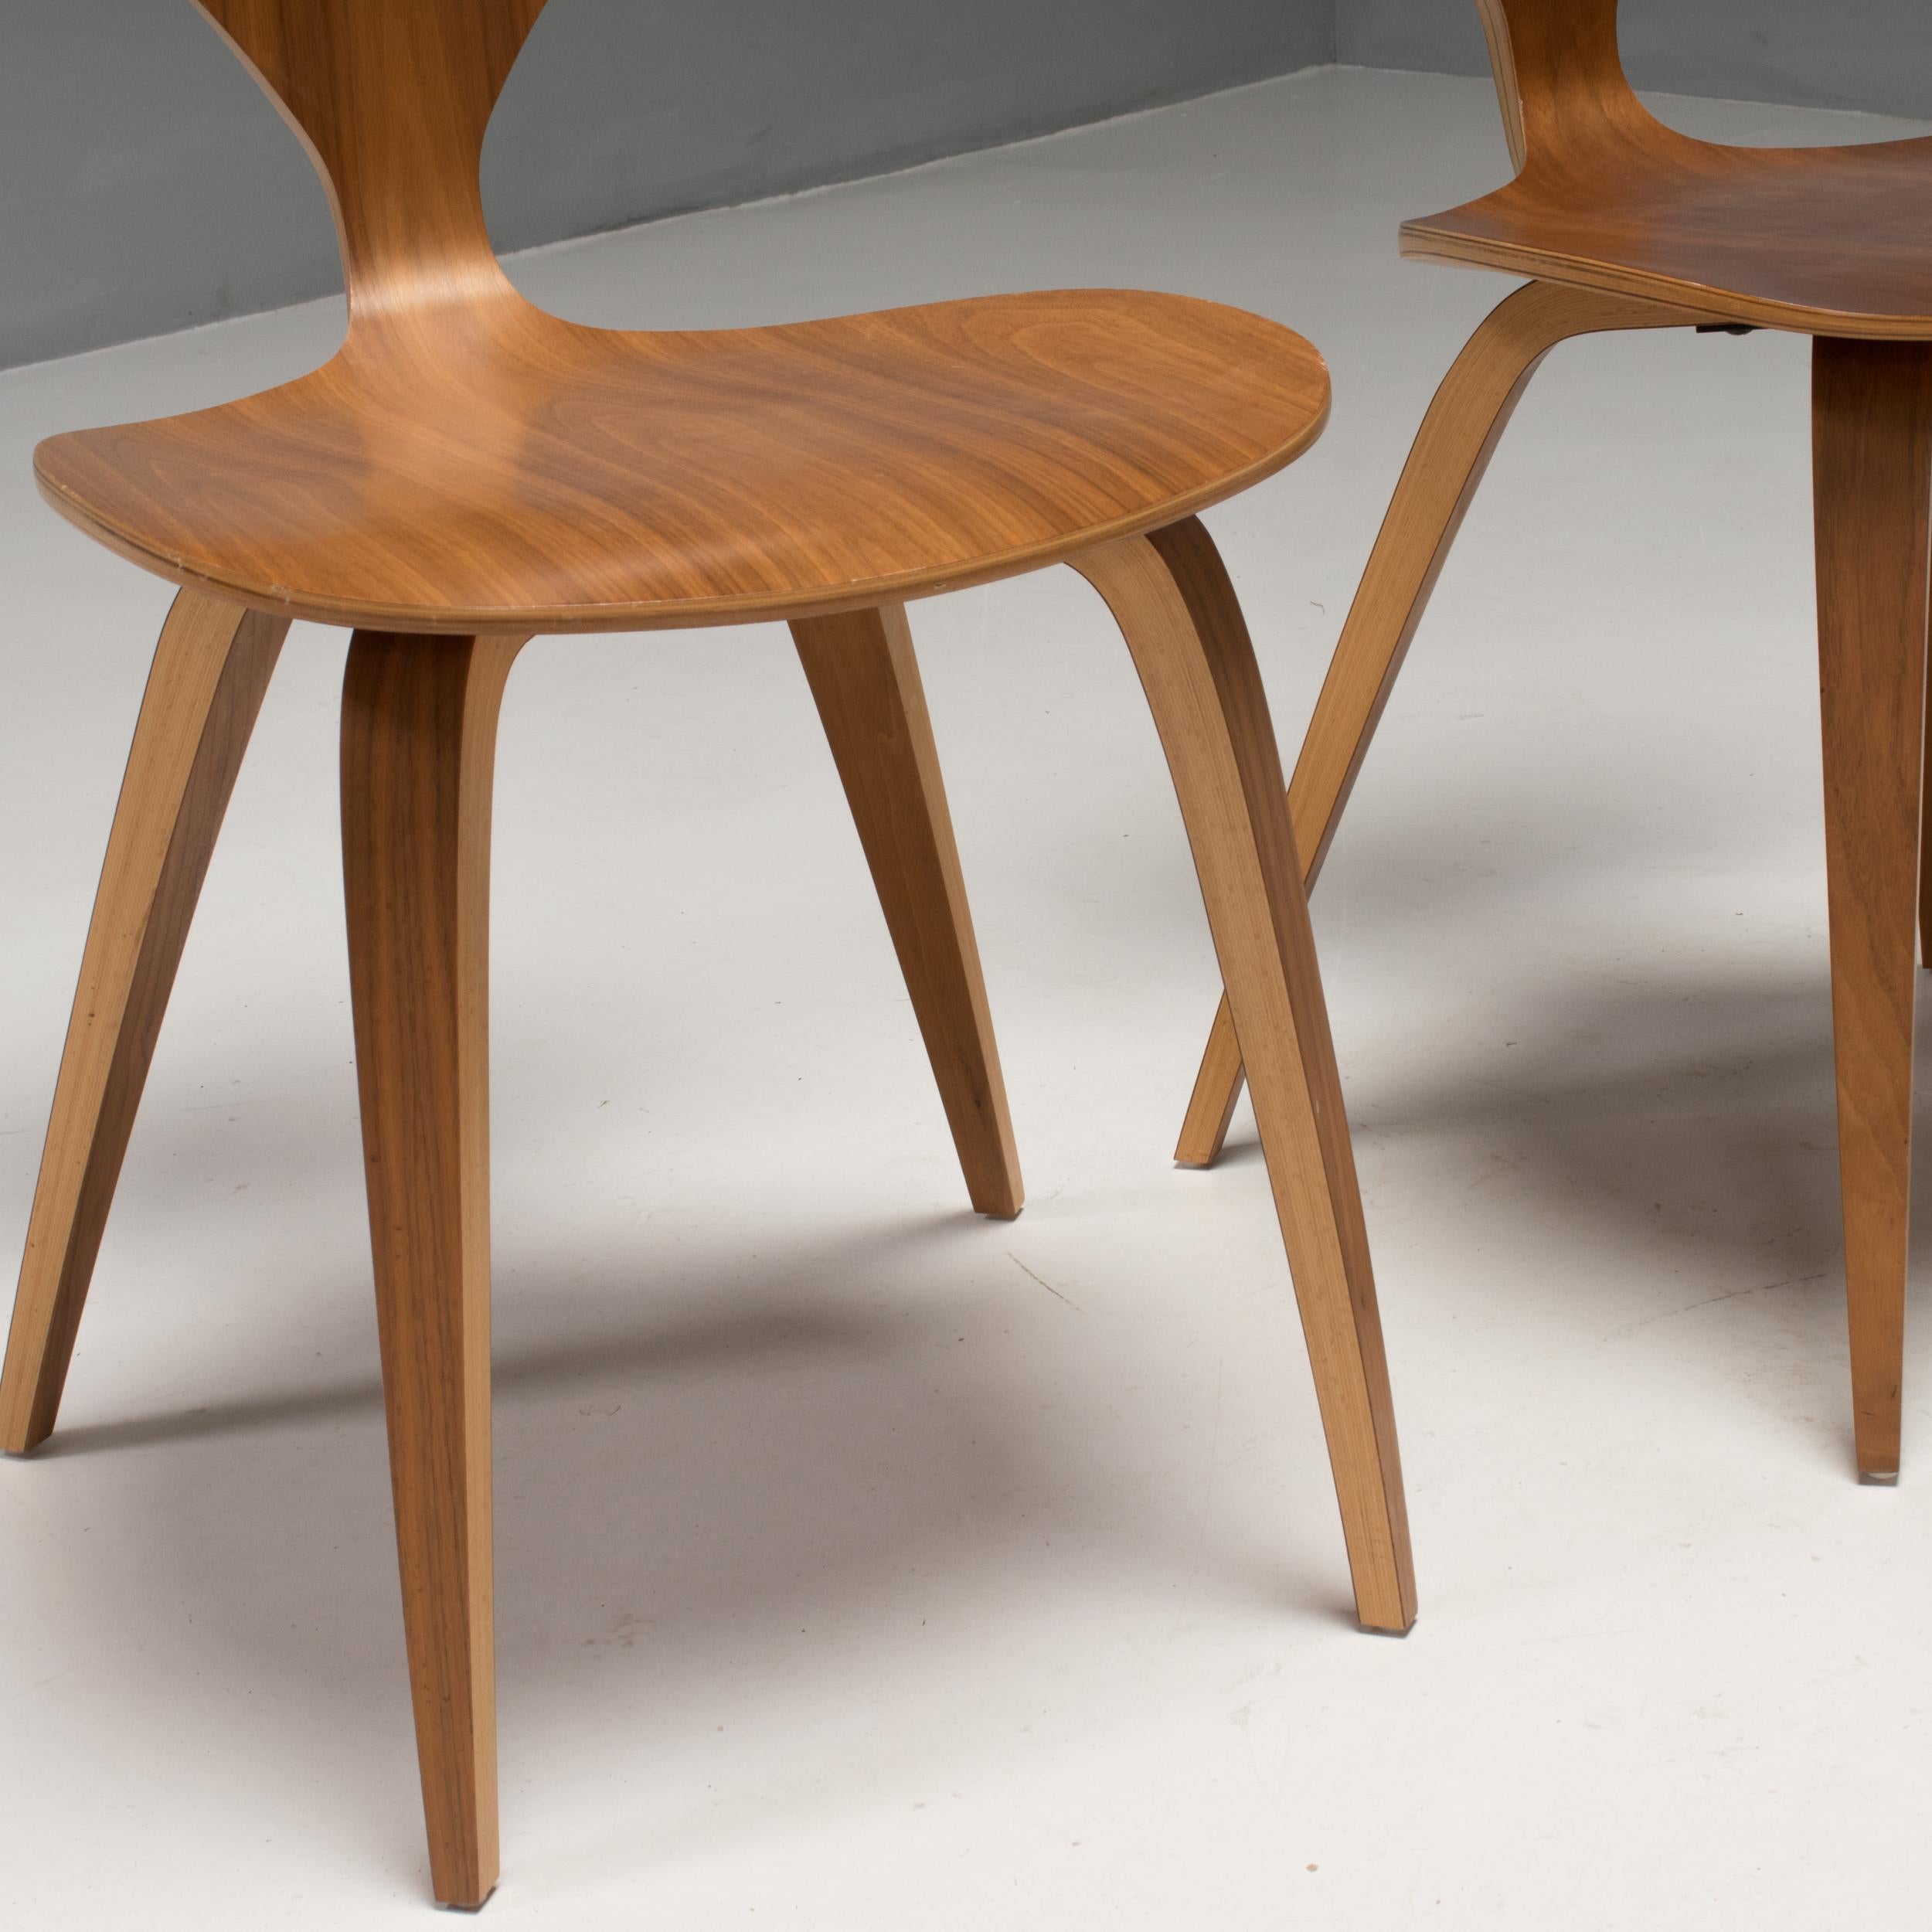 Cherner Classic Walnut Oval Dining Table and Set of 6 Chairs, 2013 6